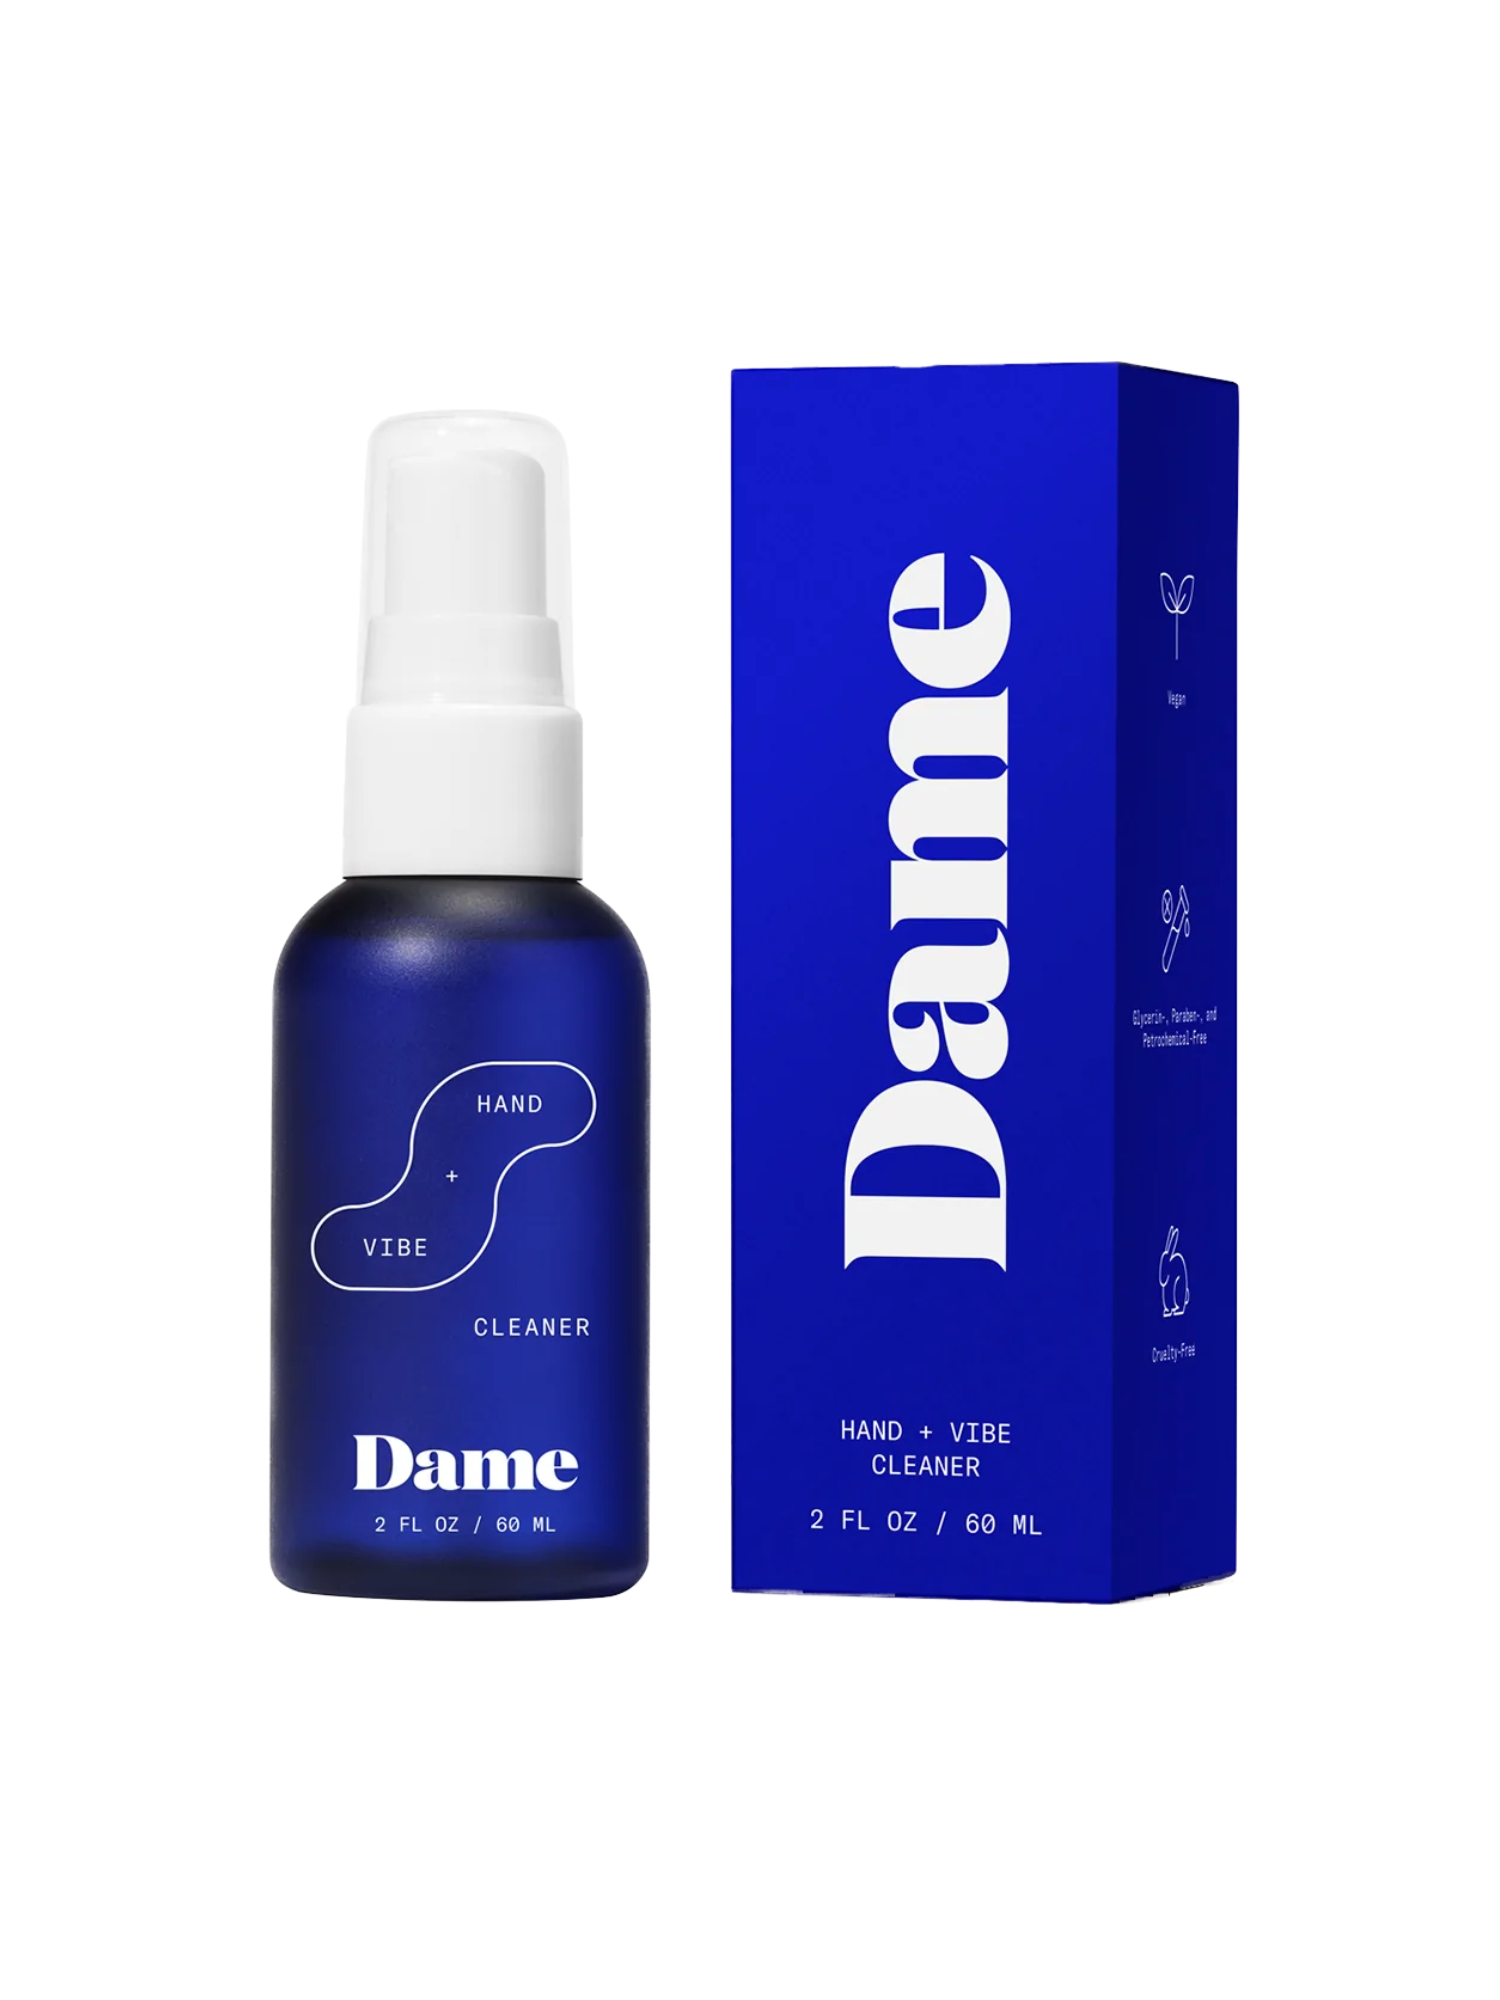 Dame, Hand+ Vibe Cleaner, Sanitizer, Sanitiser, Hand Sanitiser, Sex Toy Cleaner. Waterproof. Clinically Proven To Kill 99,9% of germs. Naturally Derived Ingredients. Paraben Free, Glycerin Free. Nourished. Nourishedeu